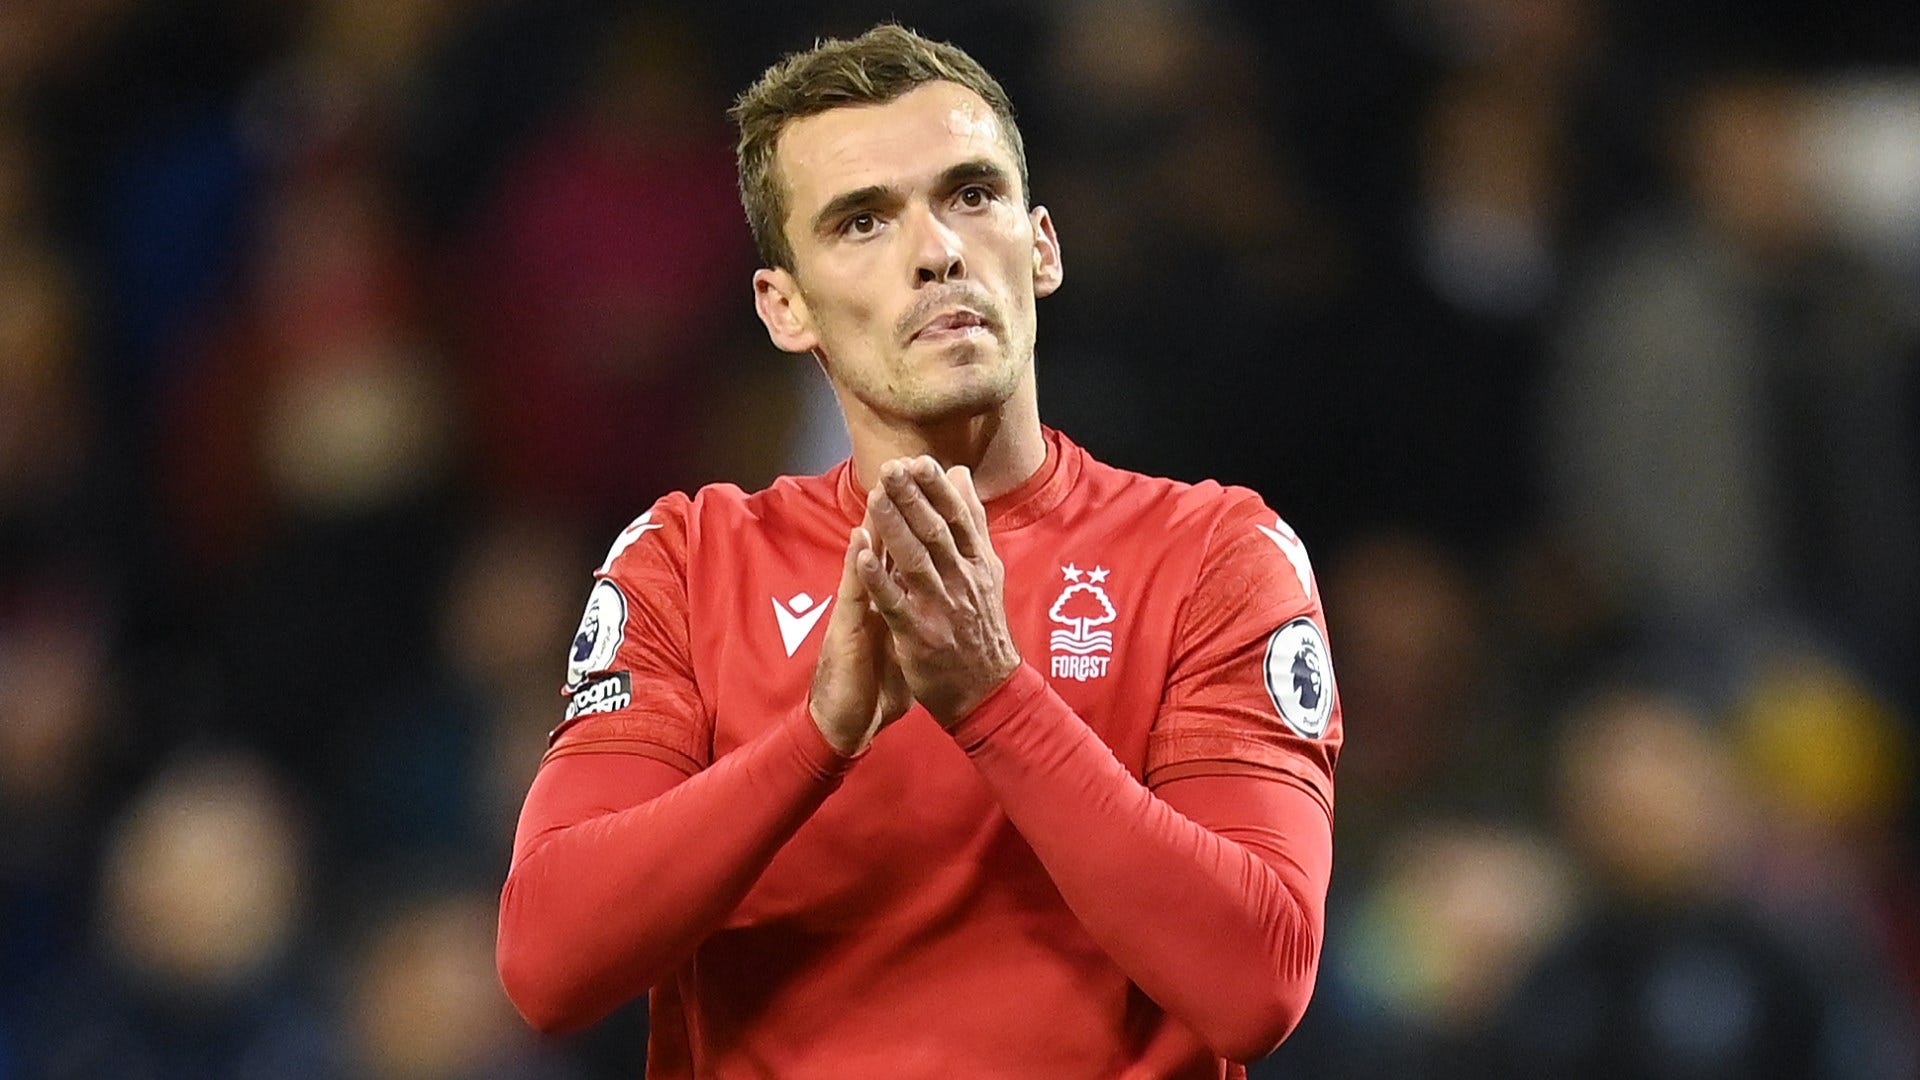 Forest's Toffolo Charged With 375 Alleged Betting Breaches